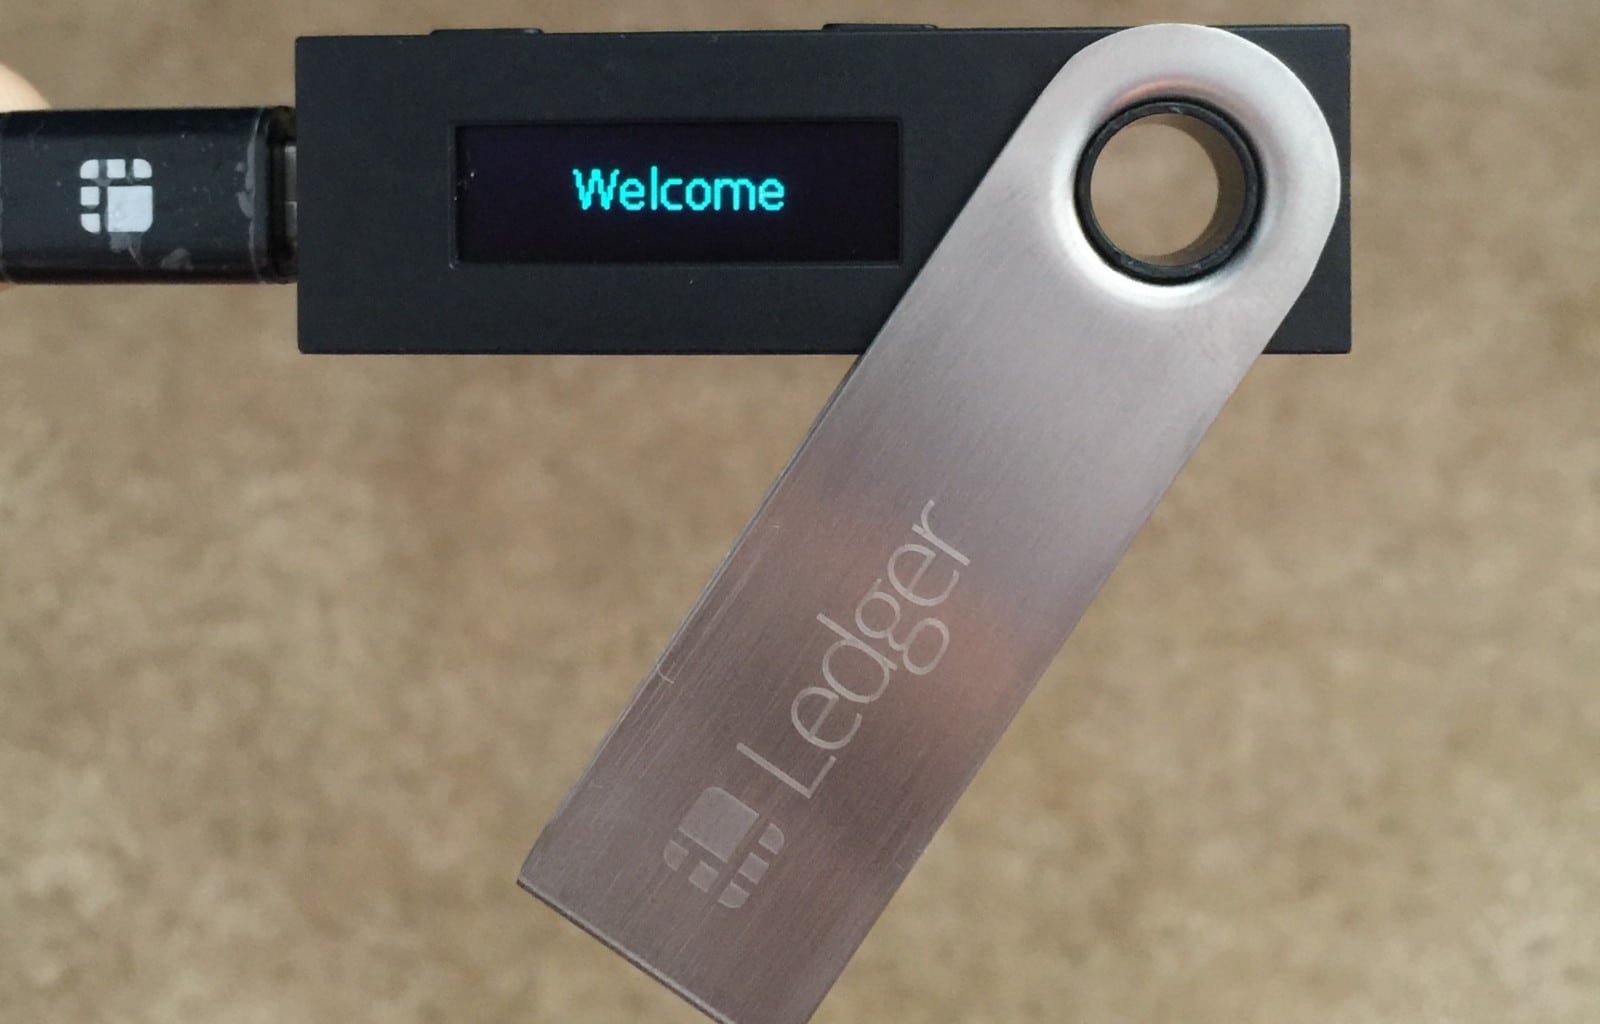 Hardware wallet for only 5 dollars